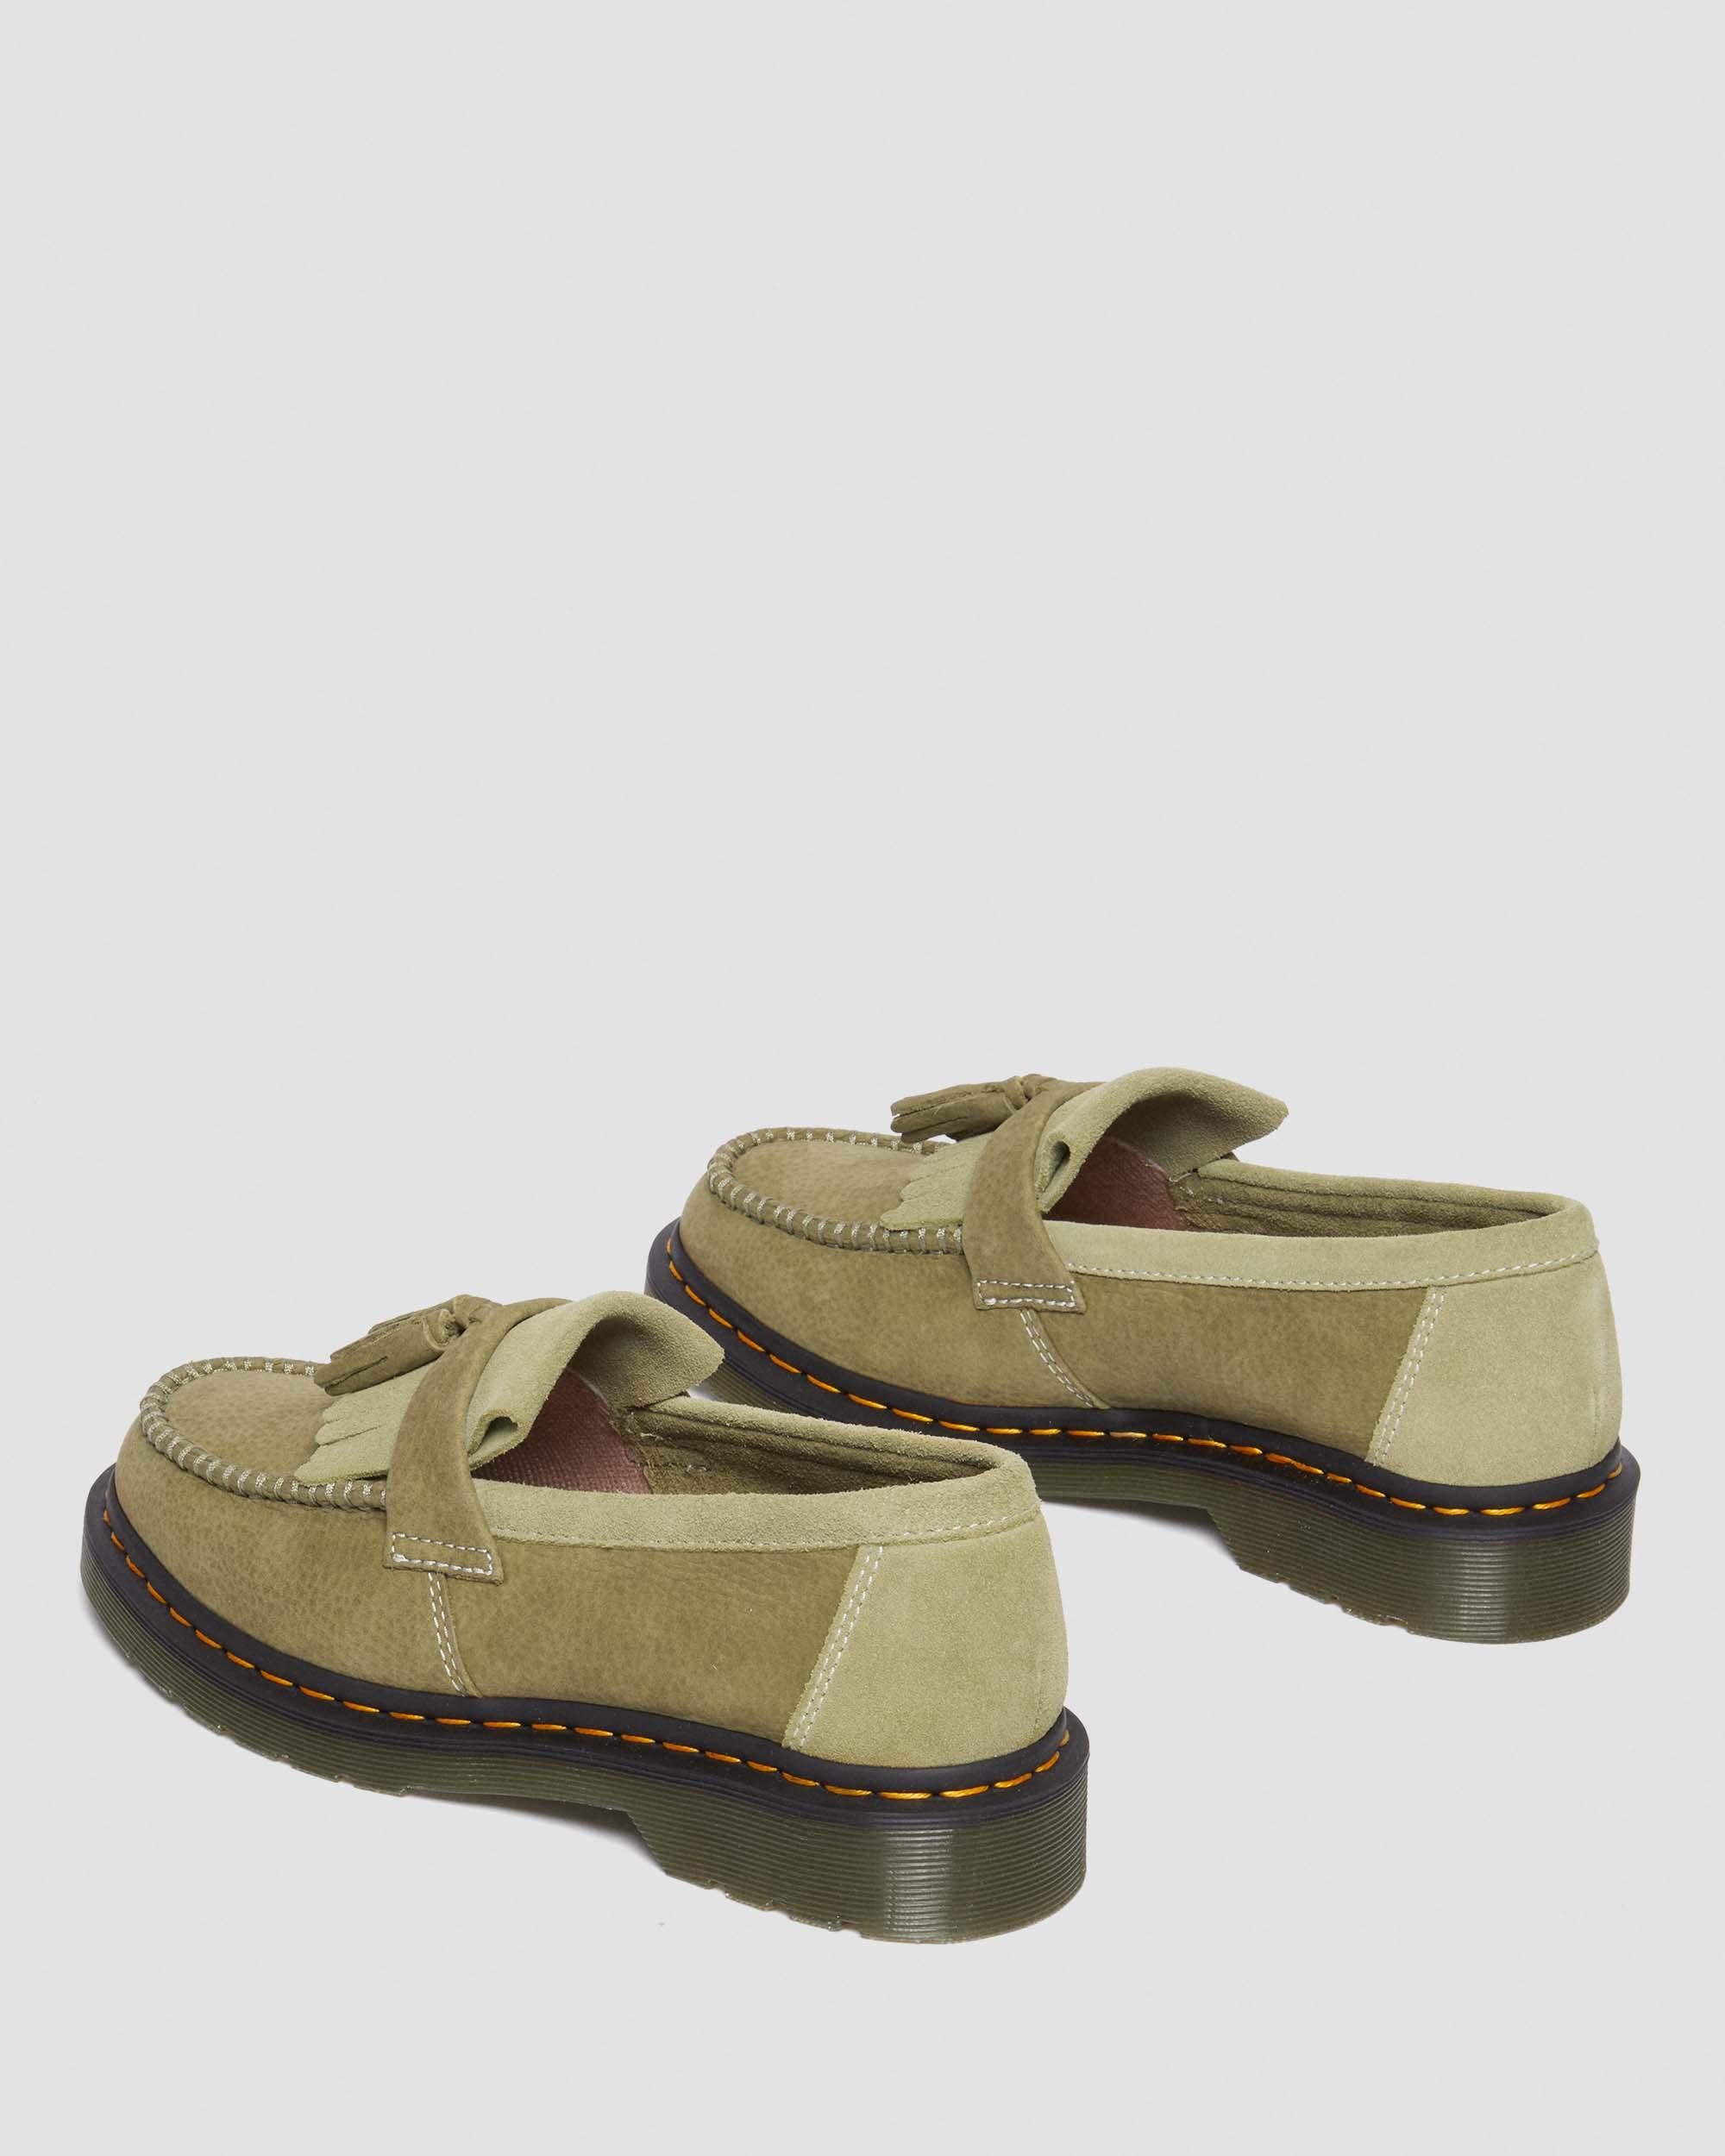 Adrian Tumbled Nubuck Leather Tassel Loafers in Muted Olive | Dr. Martens